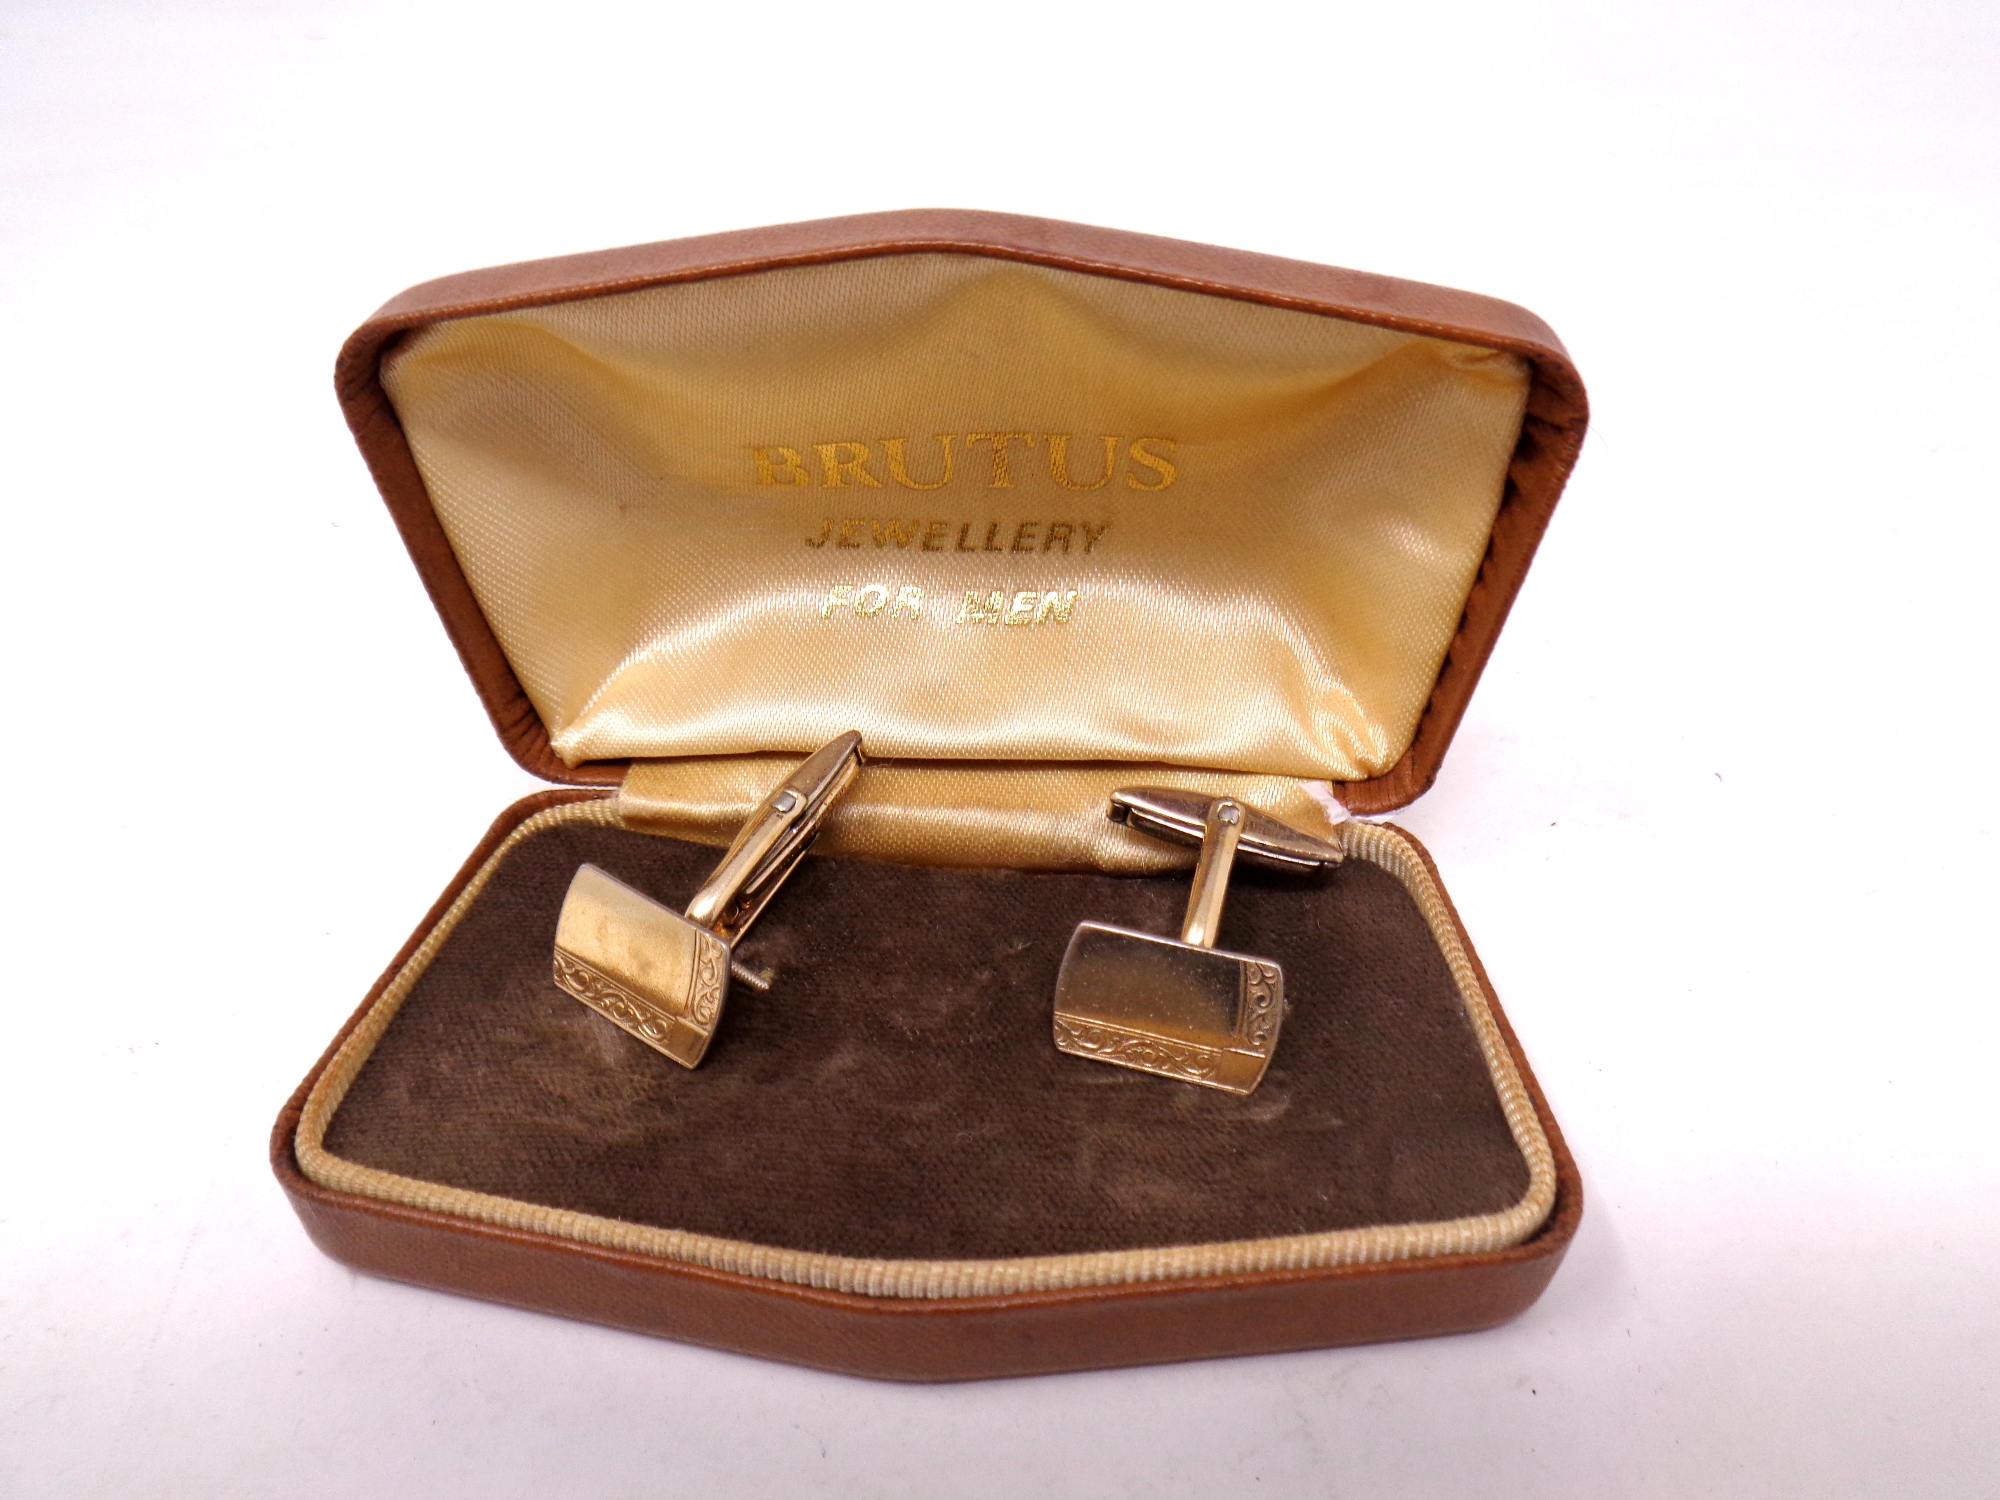 A pair of gold plated on silver cufflinks